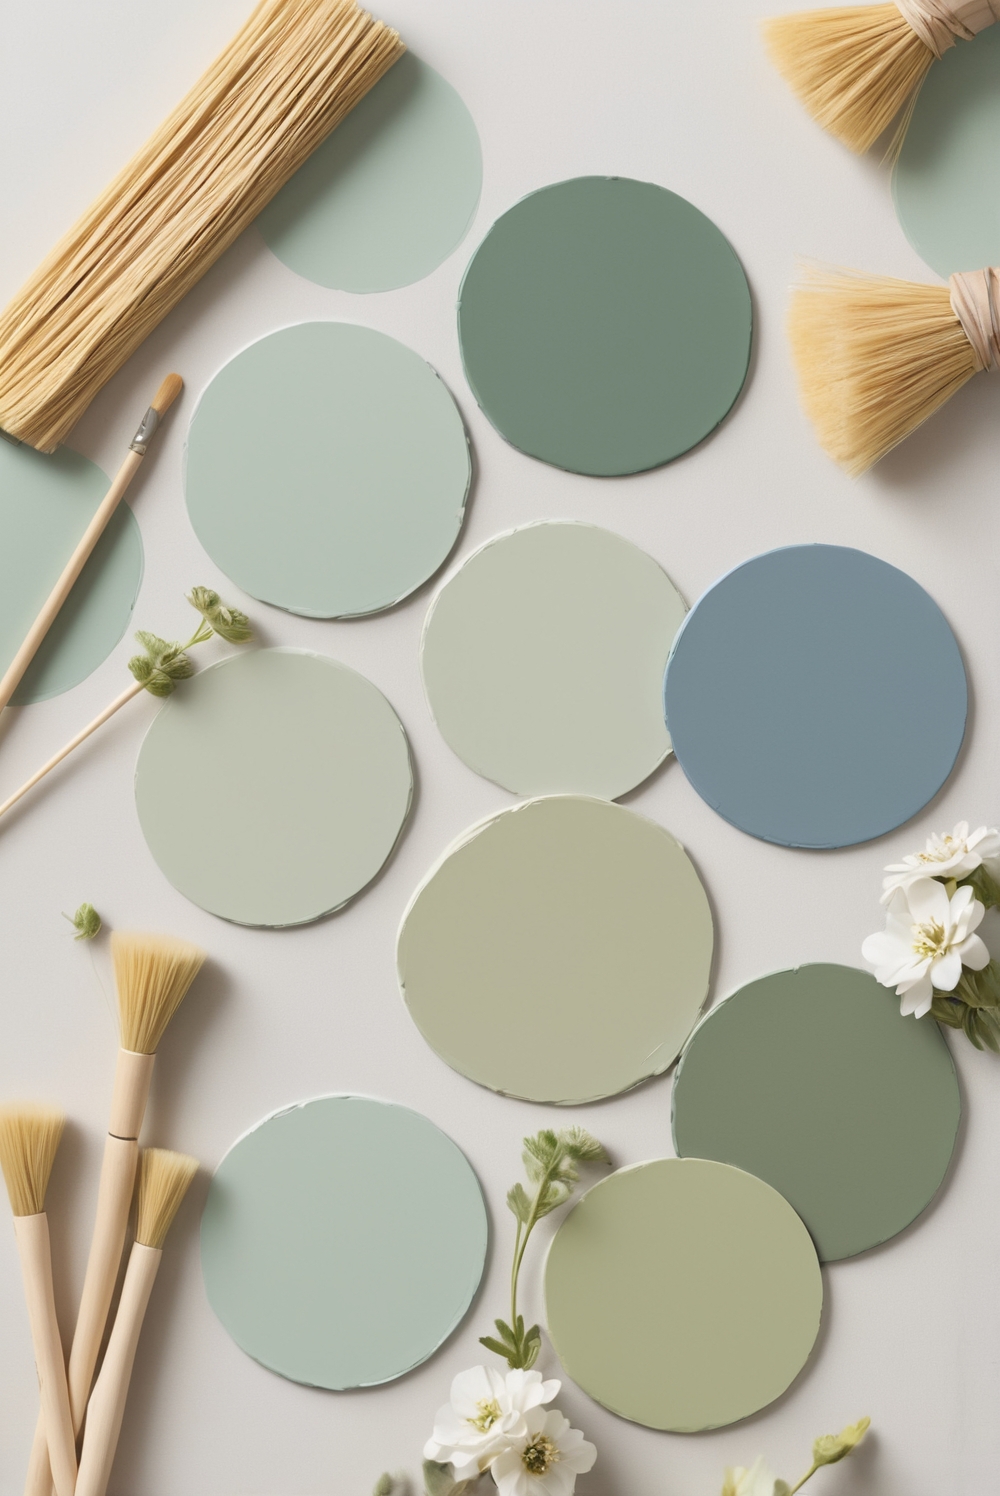 Olive Green Periwinkle decor, Home decor color schemes, Interior decorating ideas, Wall paint colors, Decorating tips, Interior design inspiration, Home decor trends